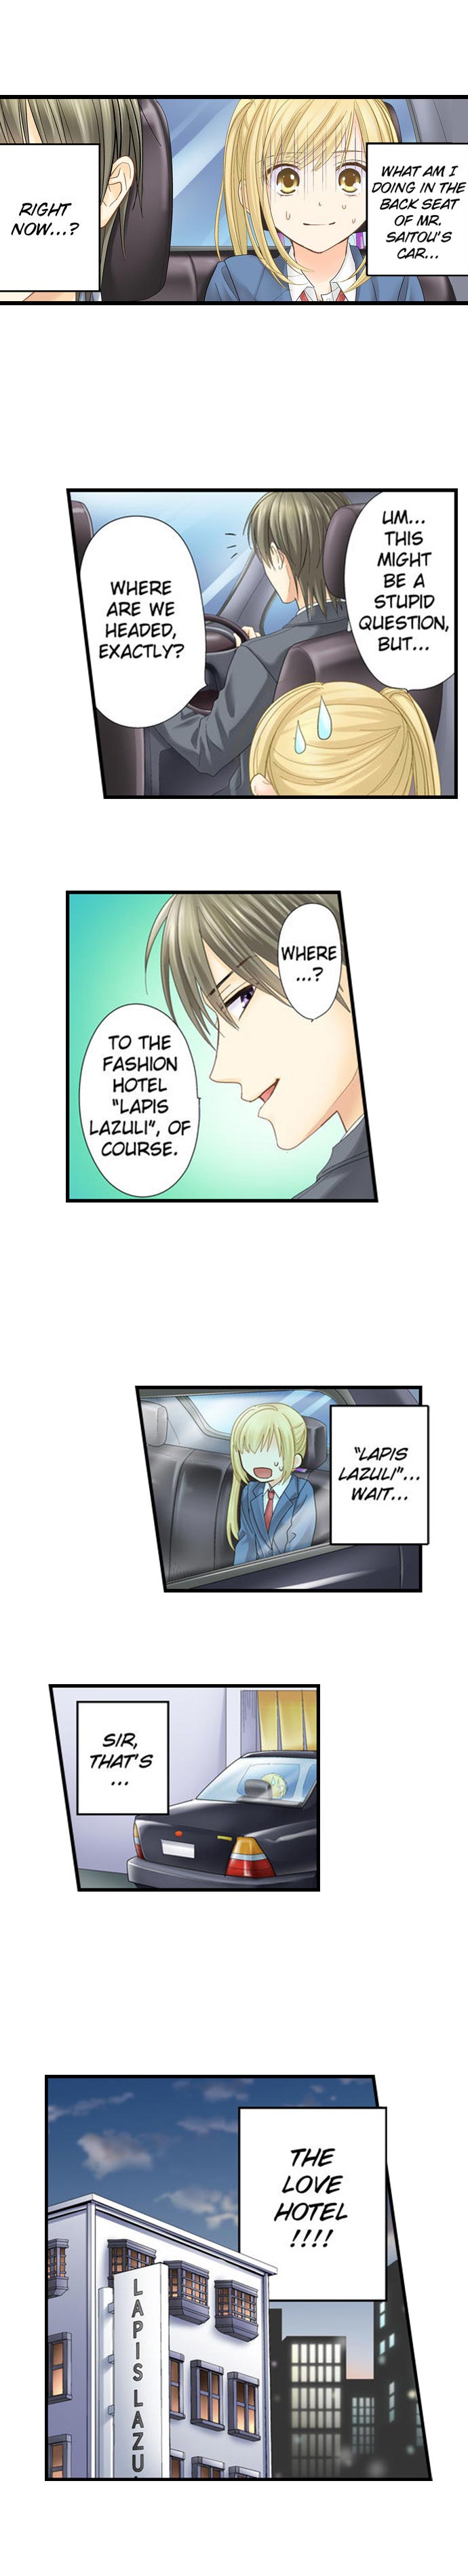 Running a Love Hotel with My Math Teacher - Chapter 9 Page 3